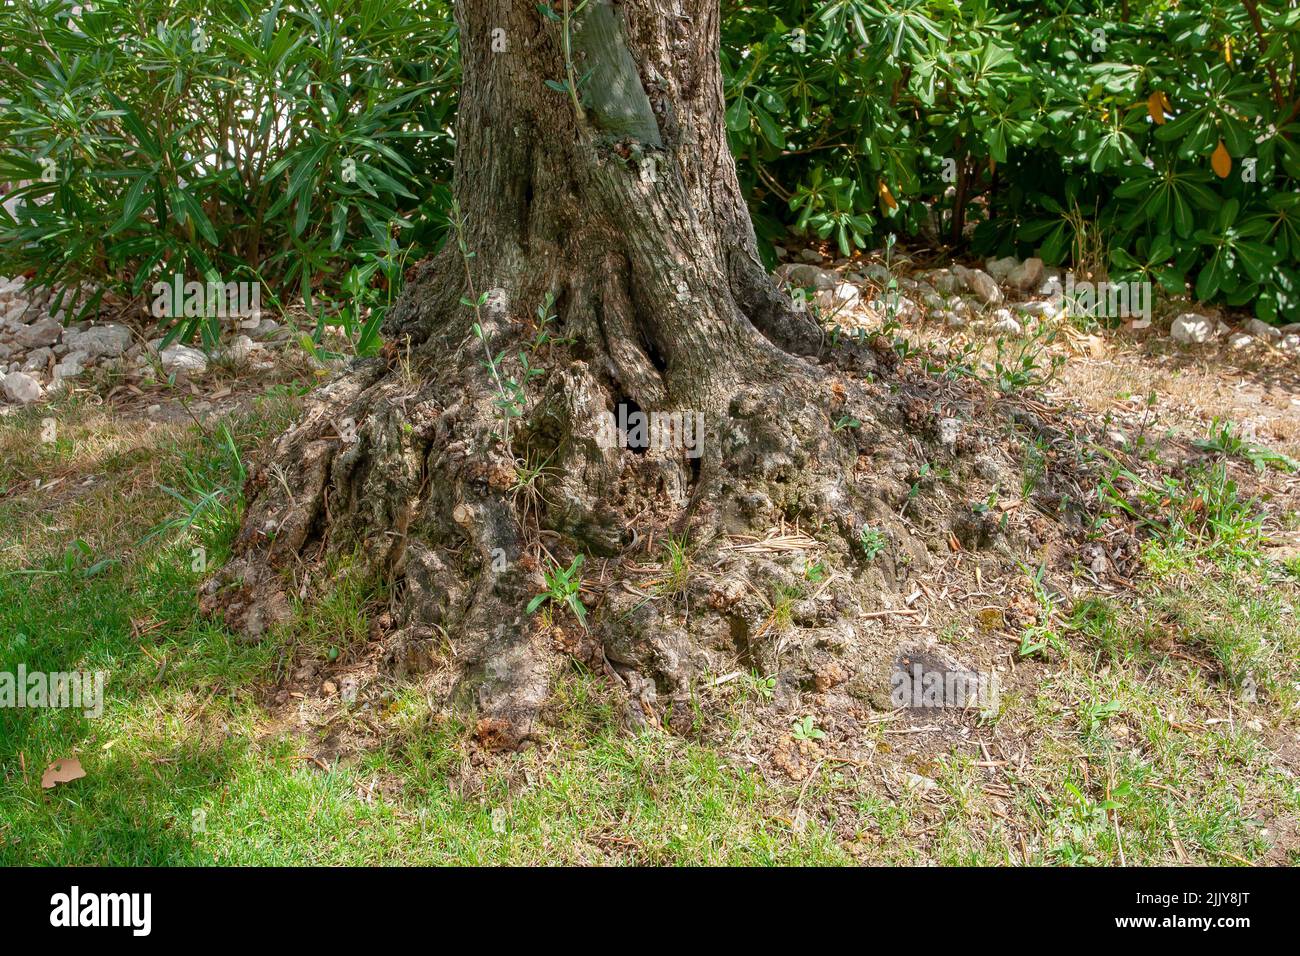 An ancient Olive Tree with gnarled trunk bark growing in a private garden in the Drome region of France Stock Photo